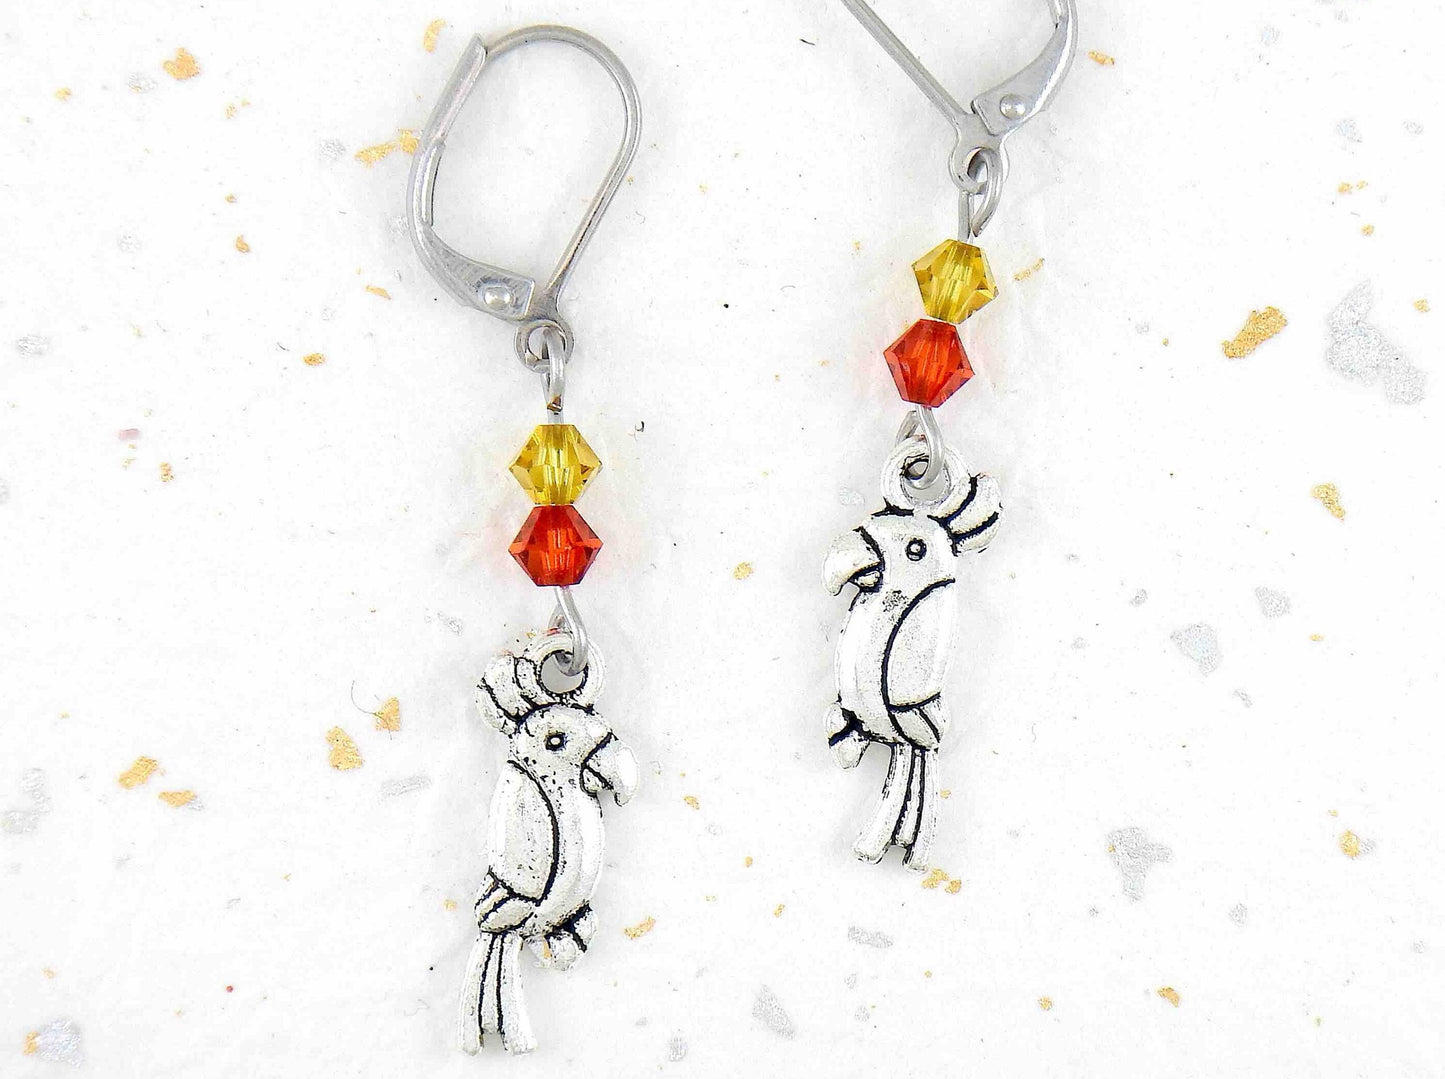 Long earrings with small pewter cockatoos (parrots) and Swarovski crystals, stainless steel lever back hooks